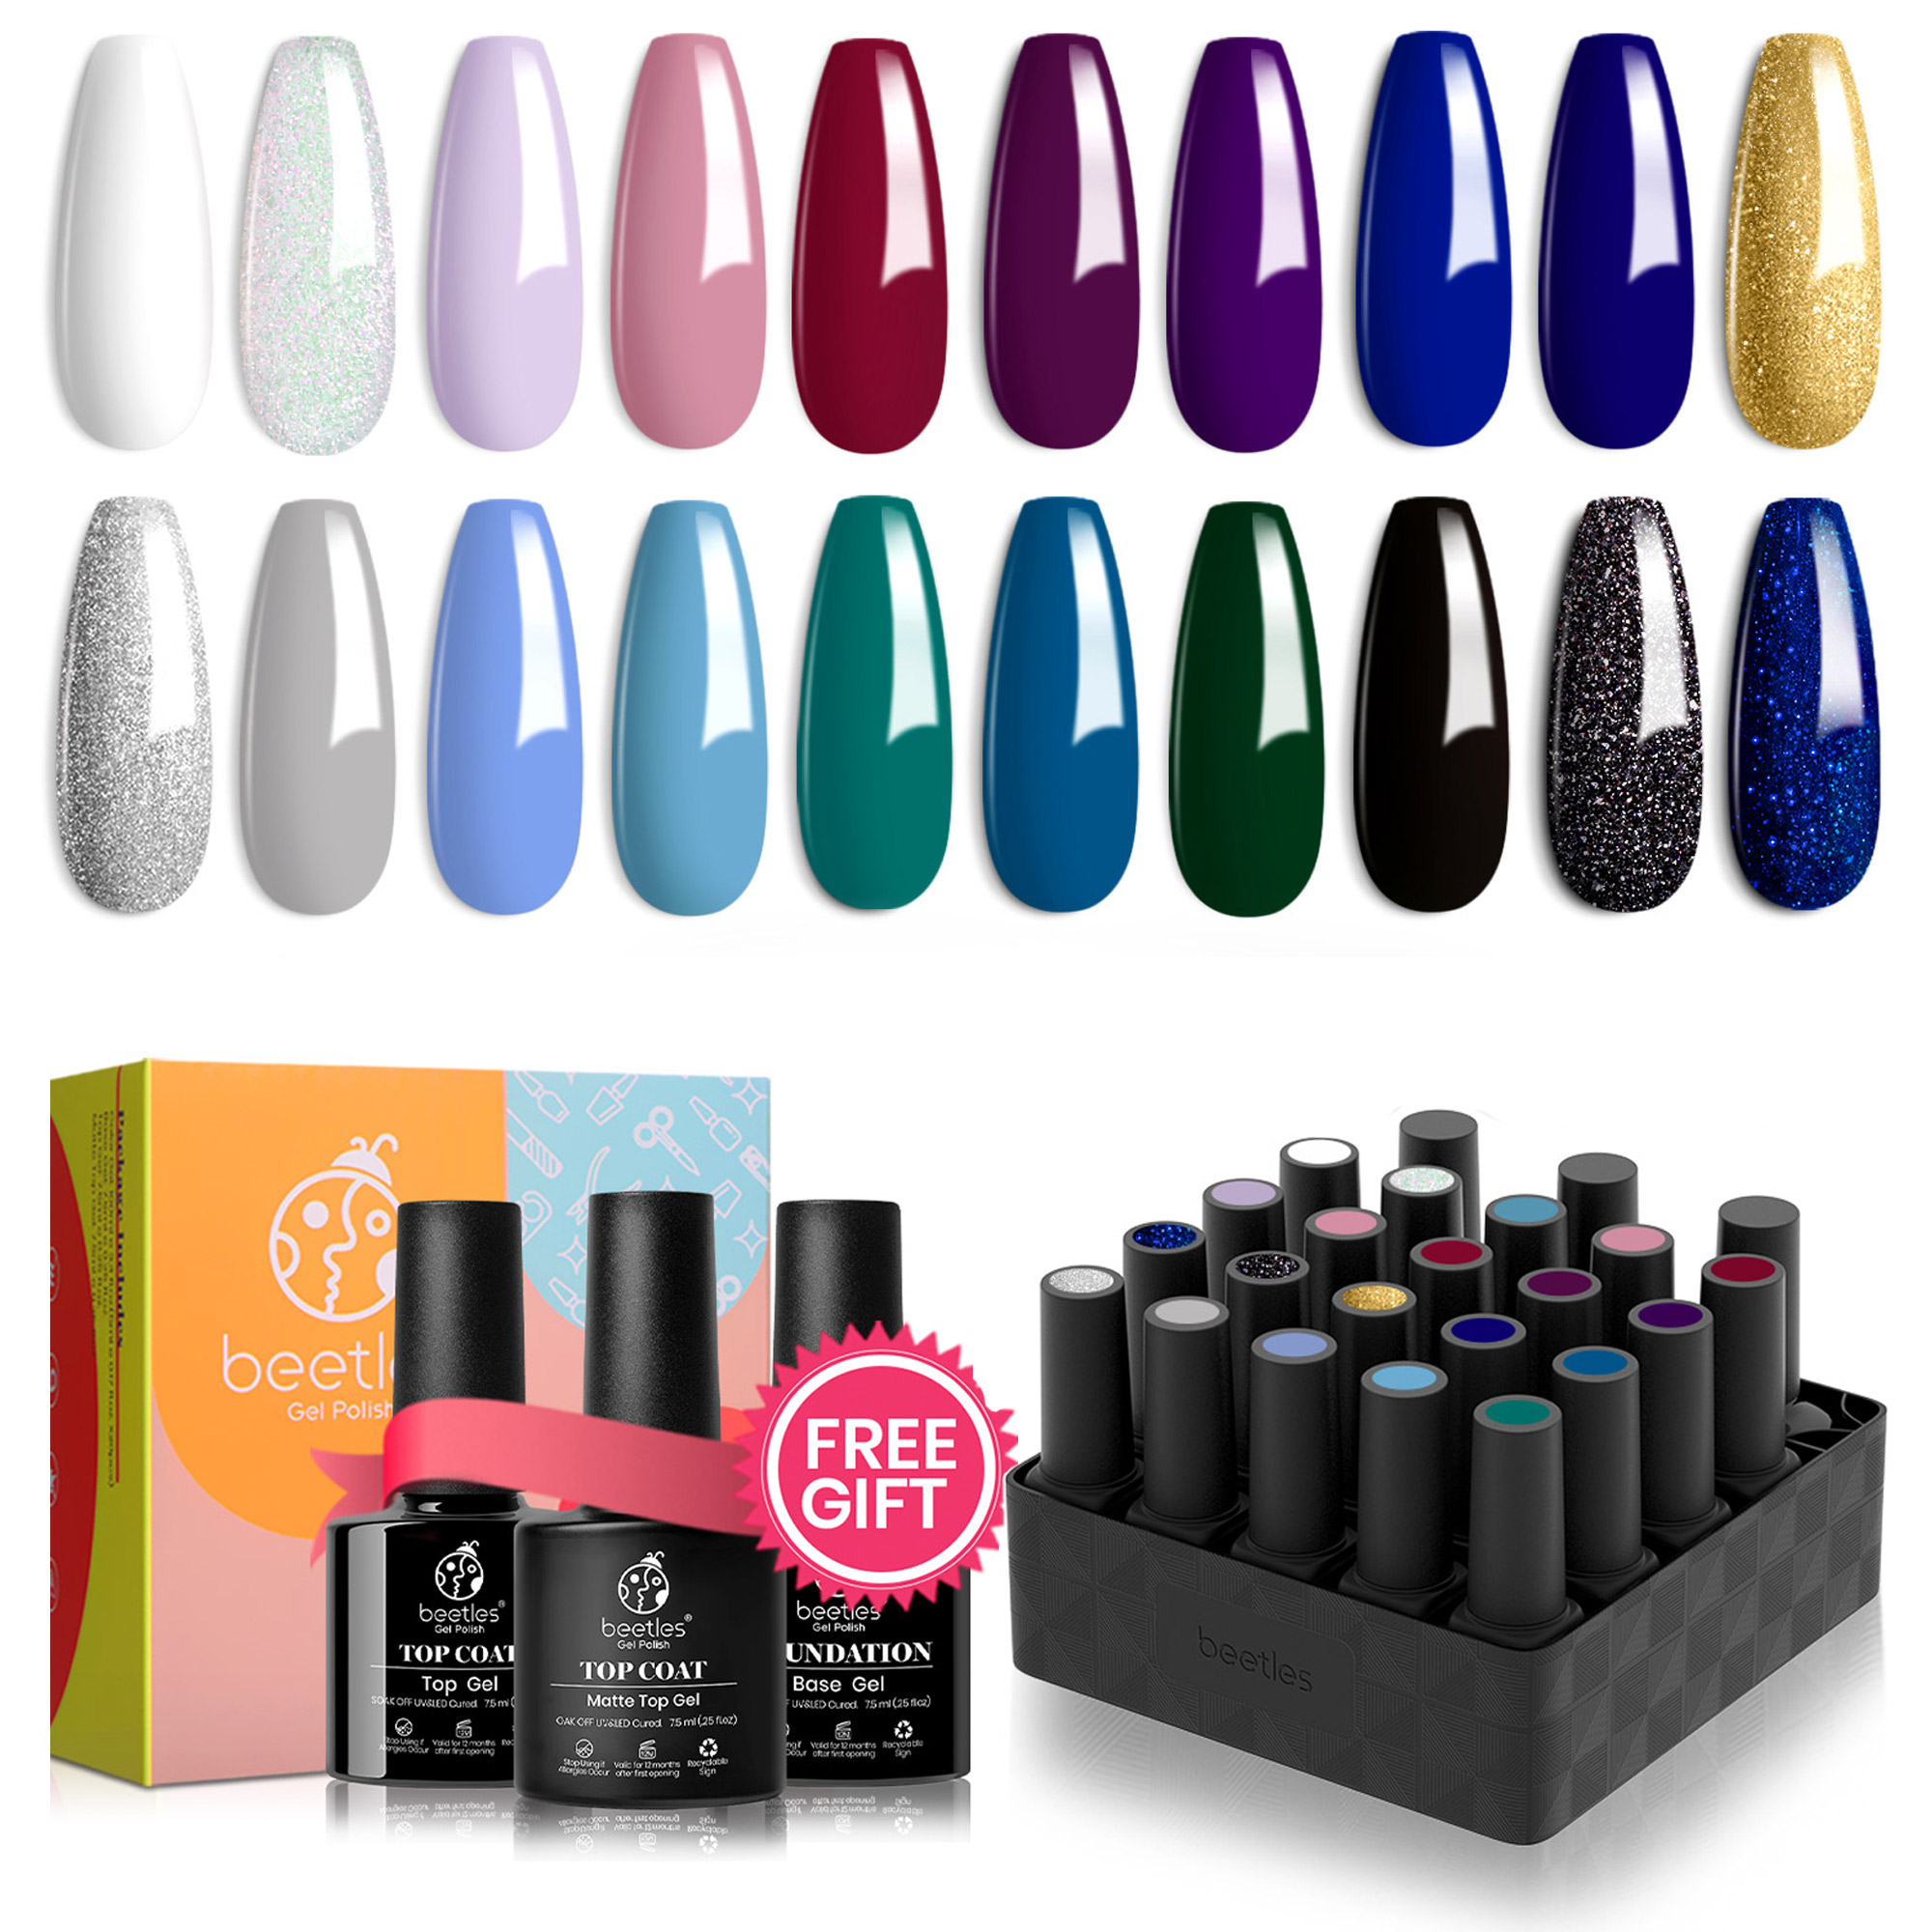 Celestial - 20 Gel Colors Set with Top and Base Coat (5ml/Each)